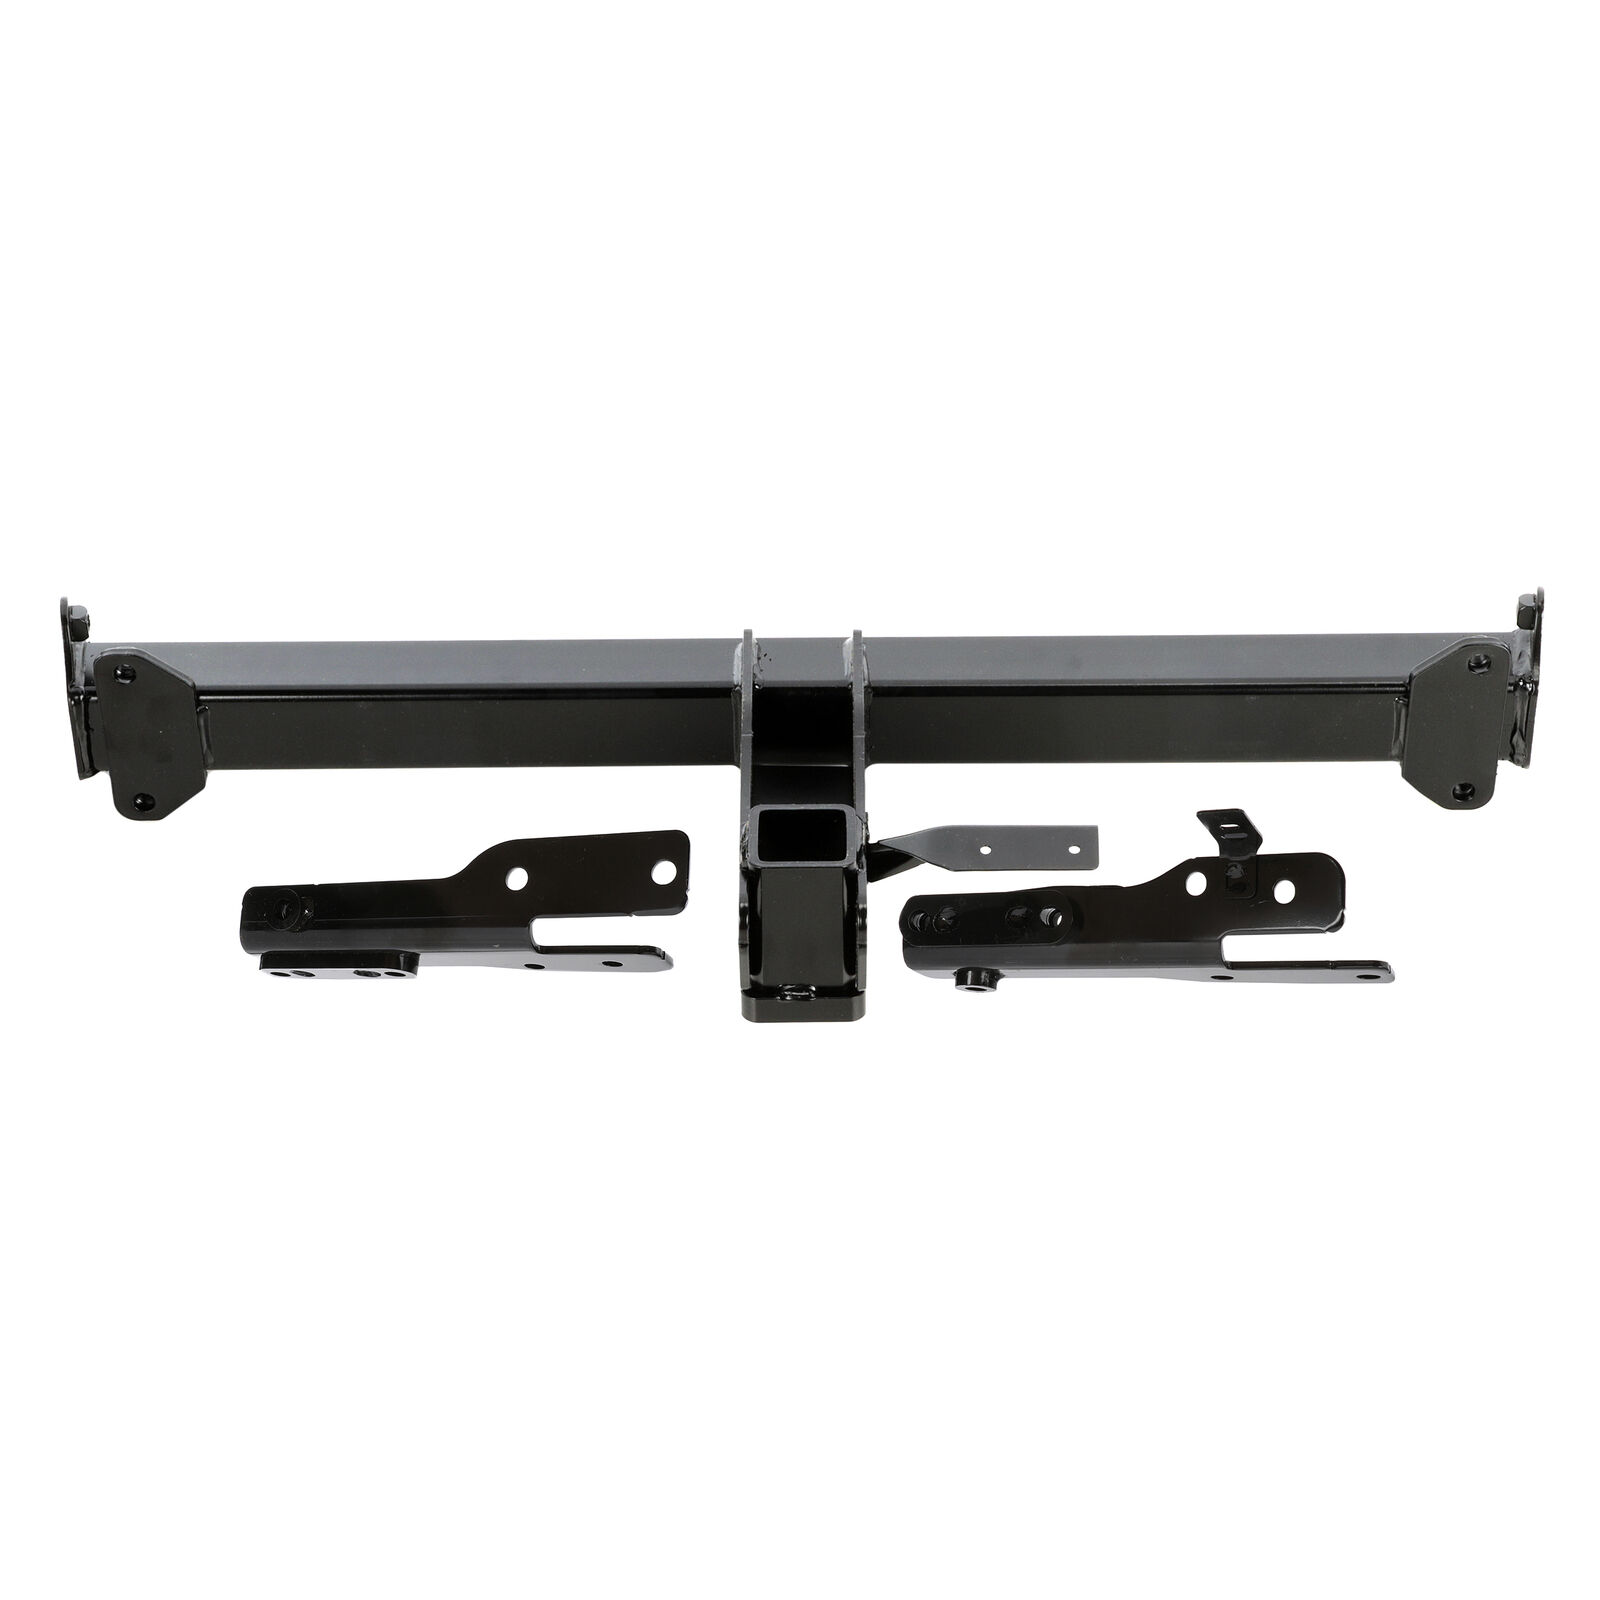 OEM NEW 2020-2024 Subaru Outback Towing & Hauling Trailer Hitch Kit L101SAN000